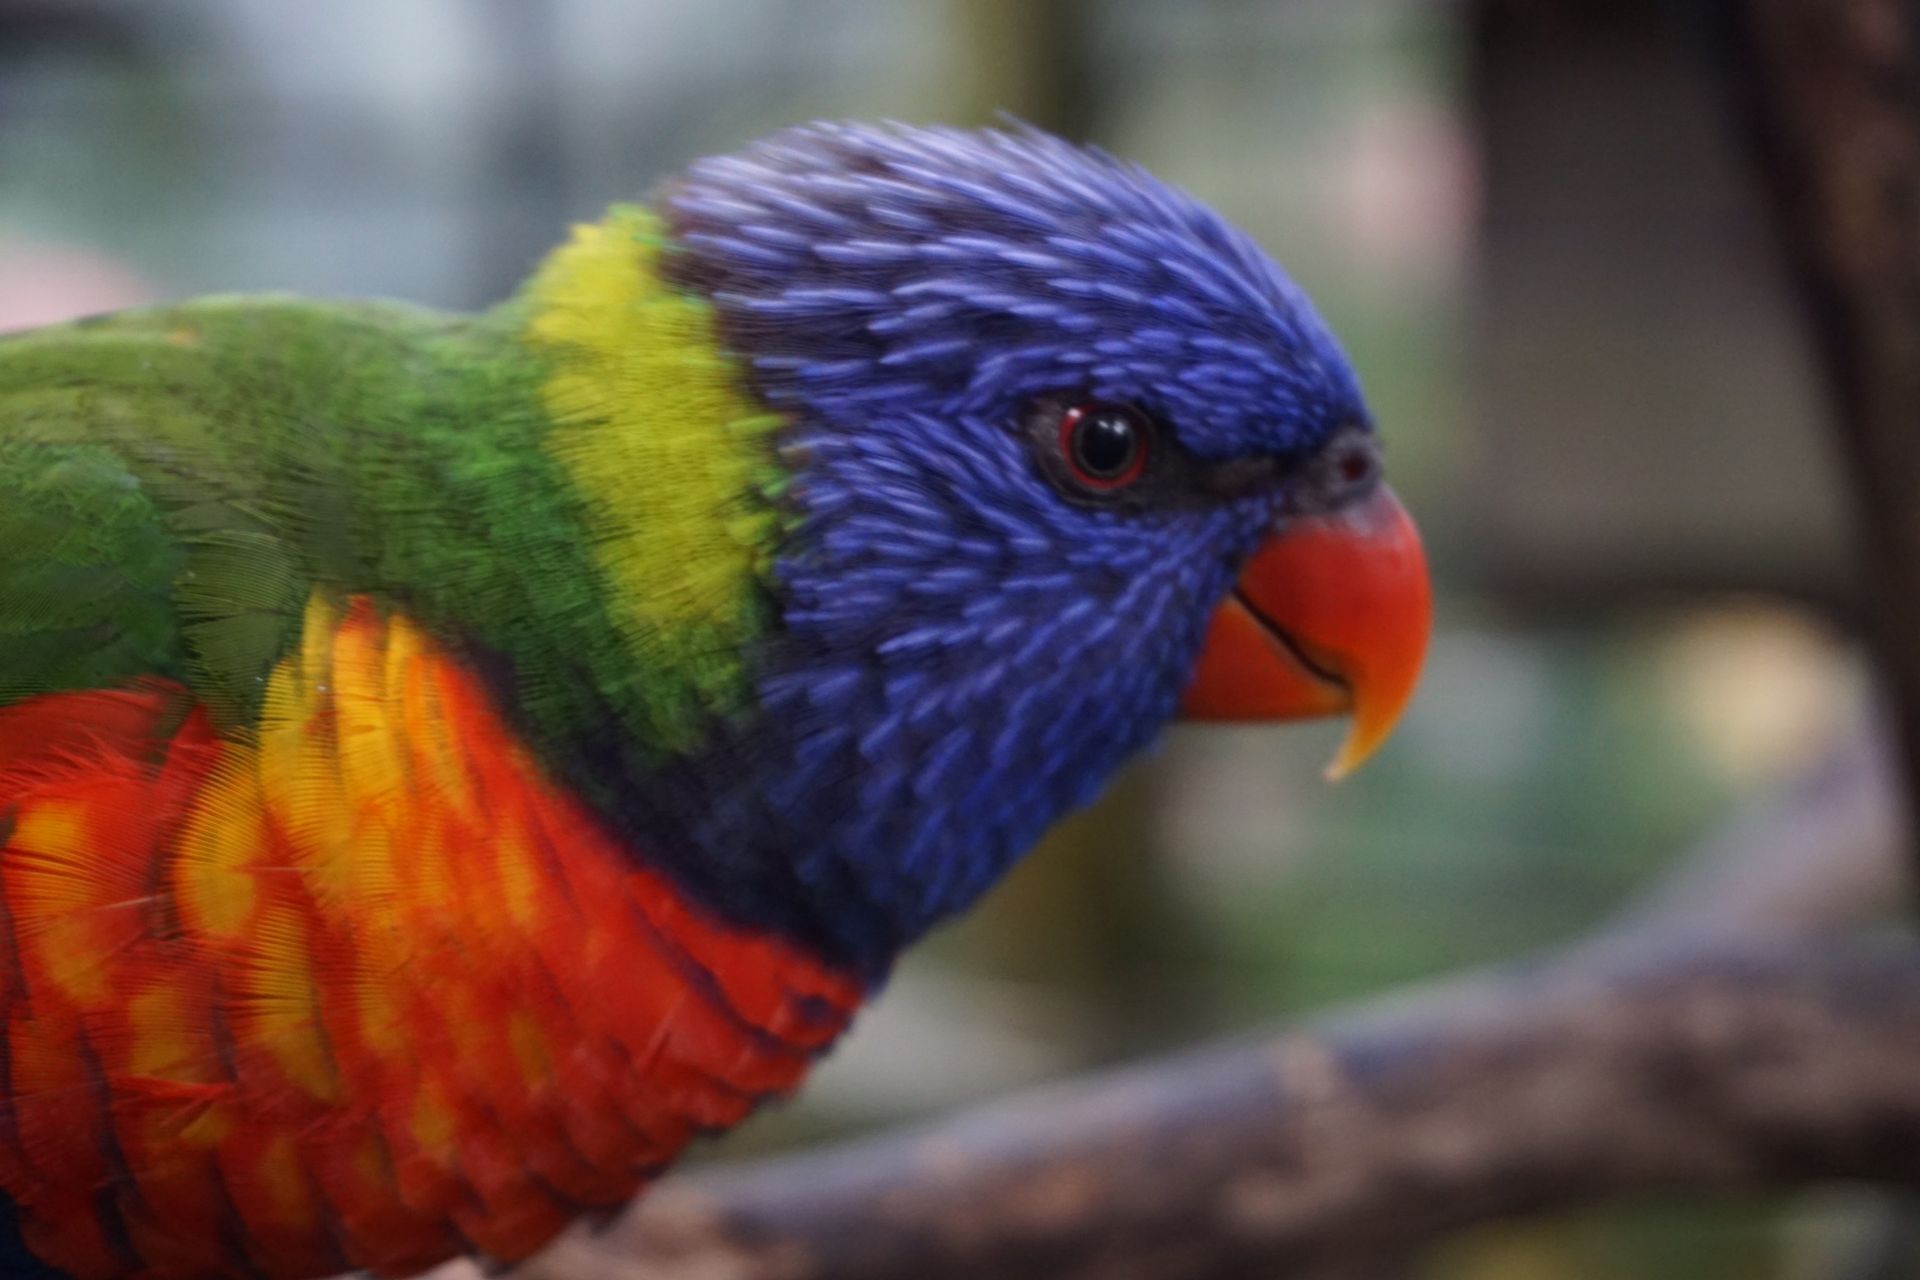 In the Bird Park, a tame parrot